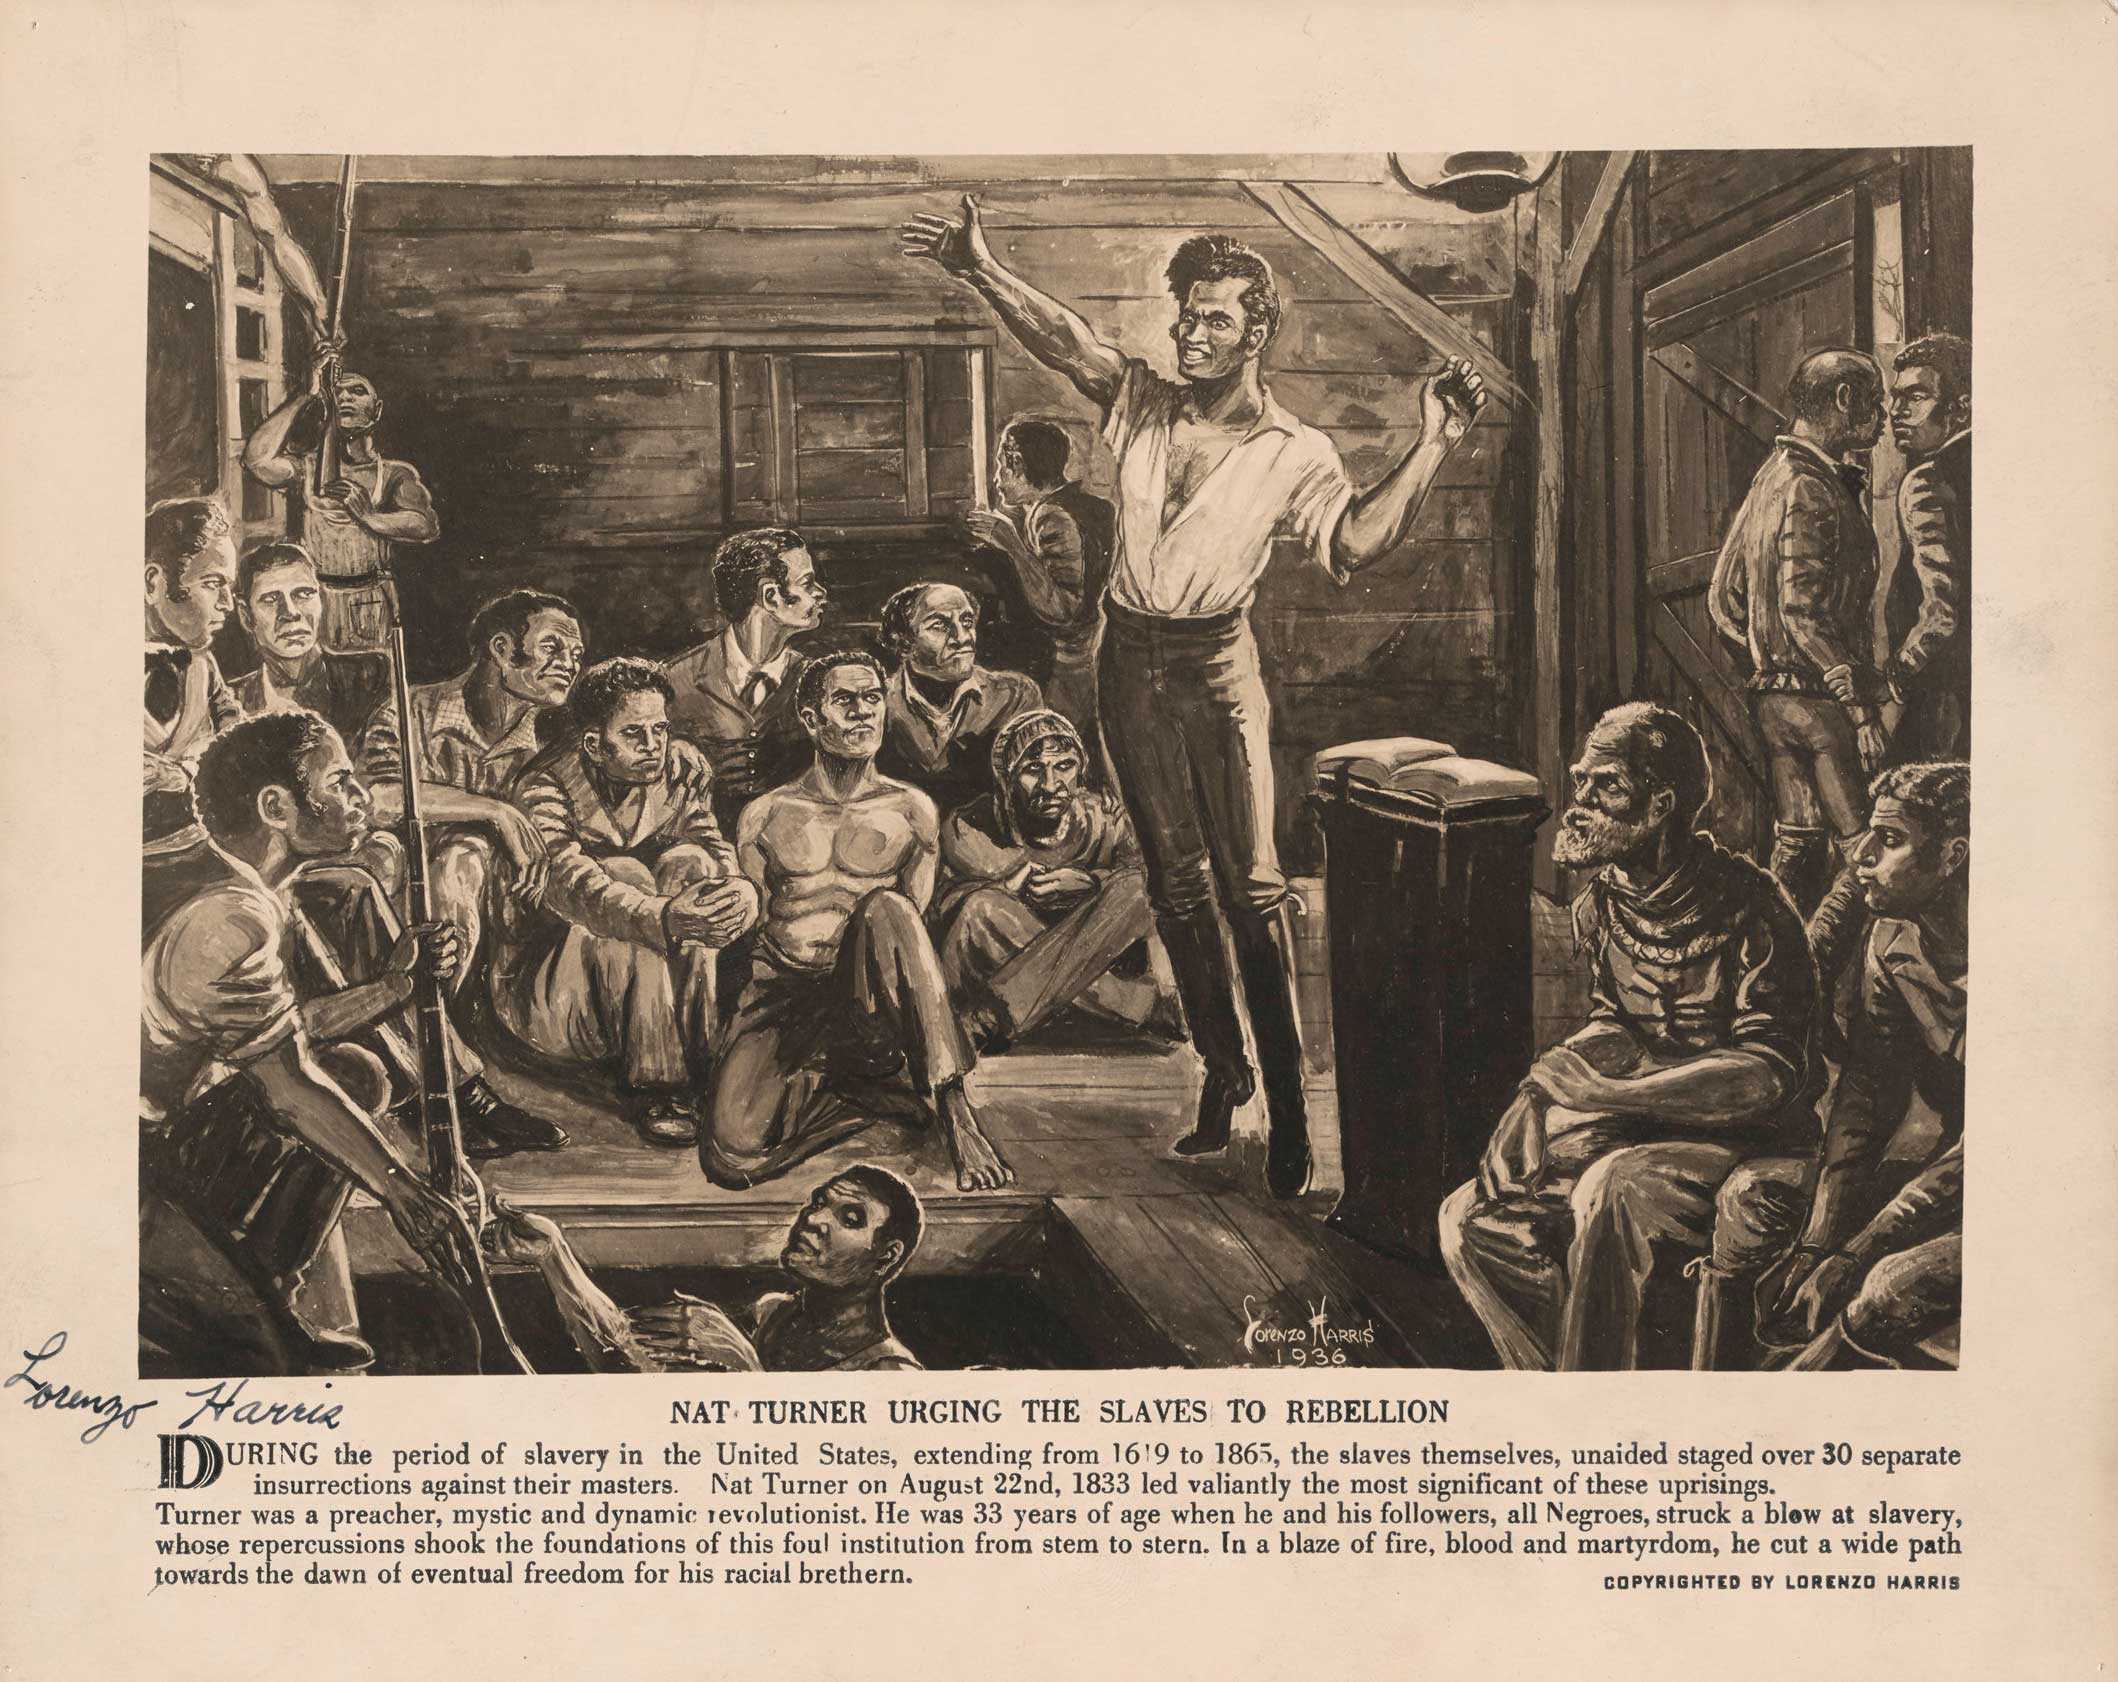 A drawing of Nat Turner speaking to the Slaves. He is standing, gestering largely with his hands, while others sit and listen.